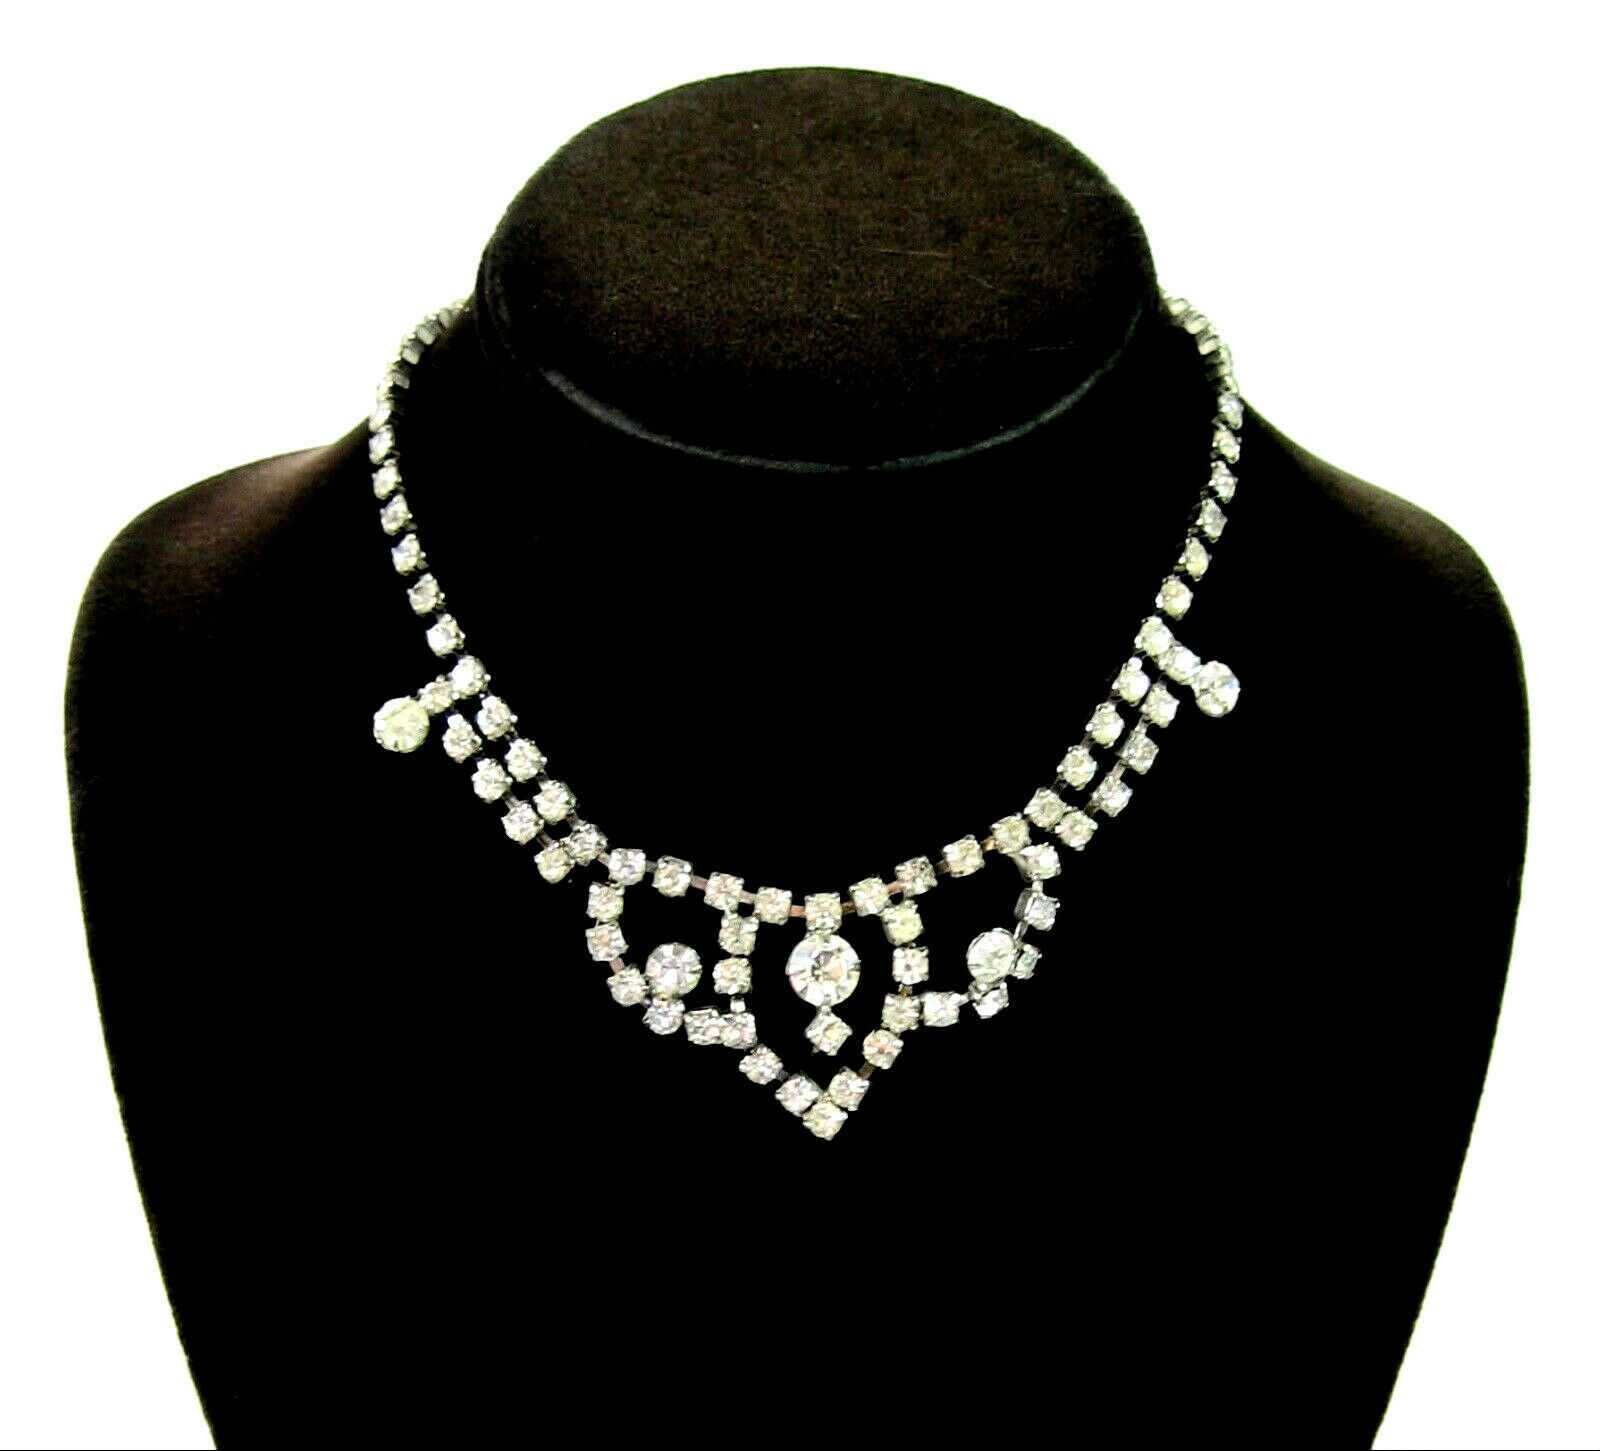 Primary image for Rhinestone Choker NECKLACE Vintage Clear Chaton Round Front Silvertone 14.5"